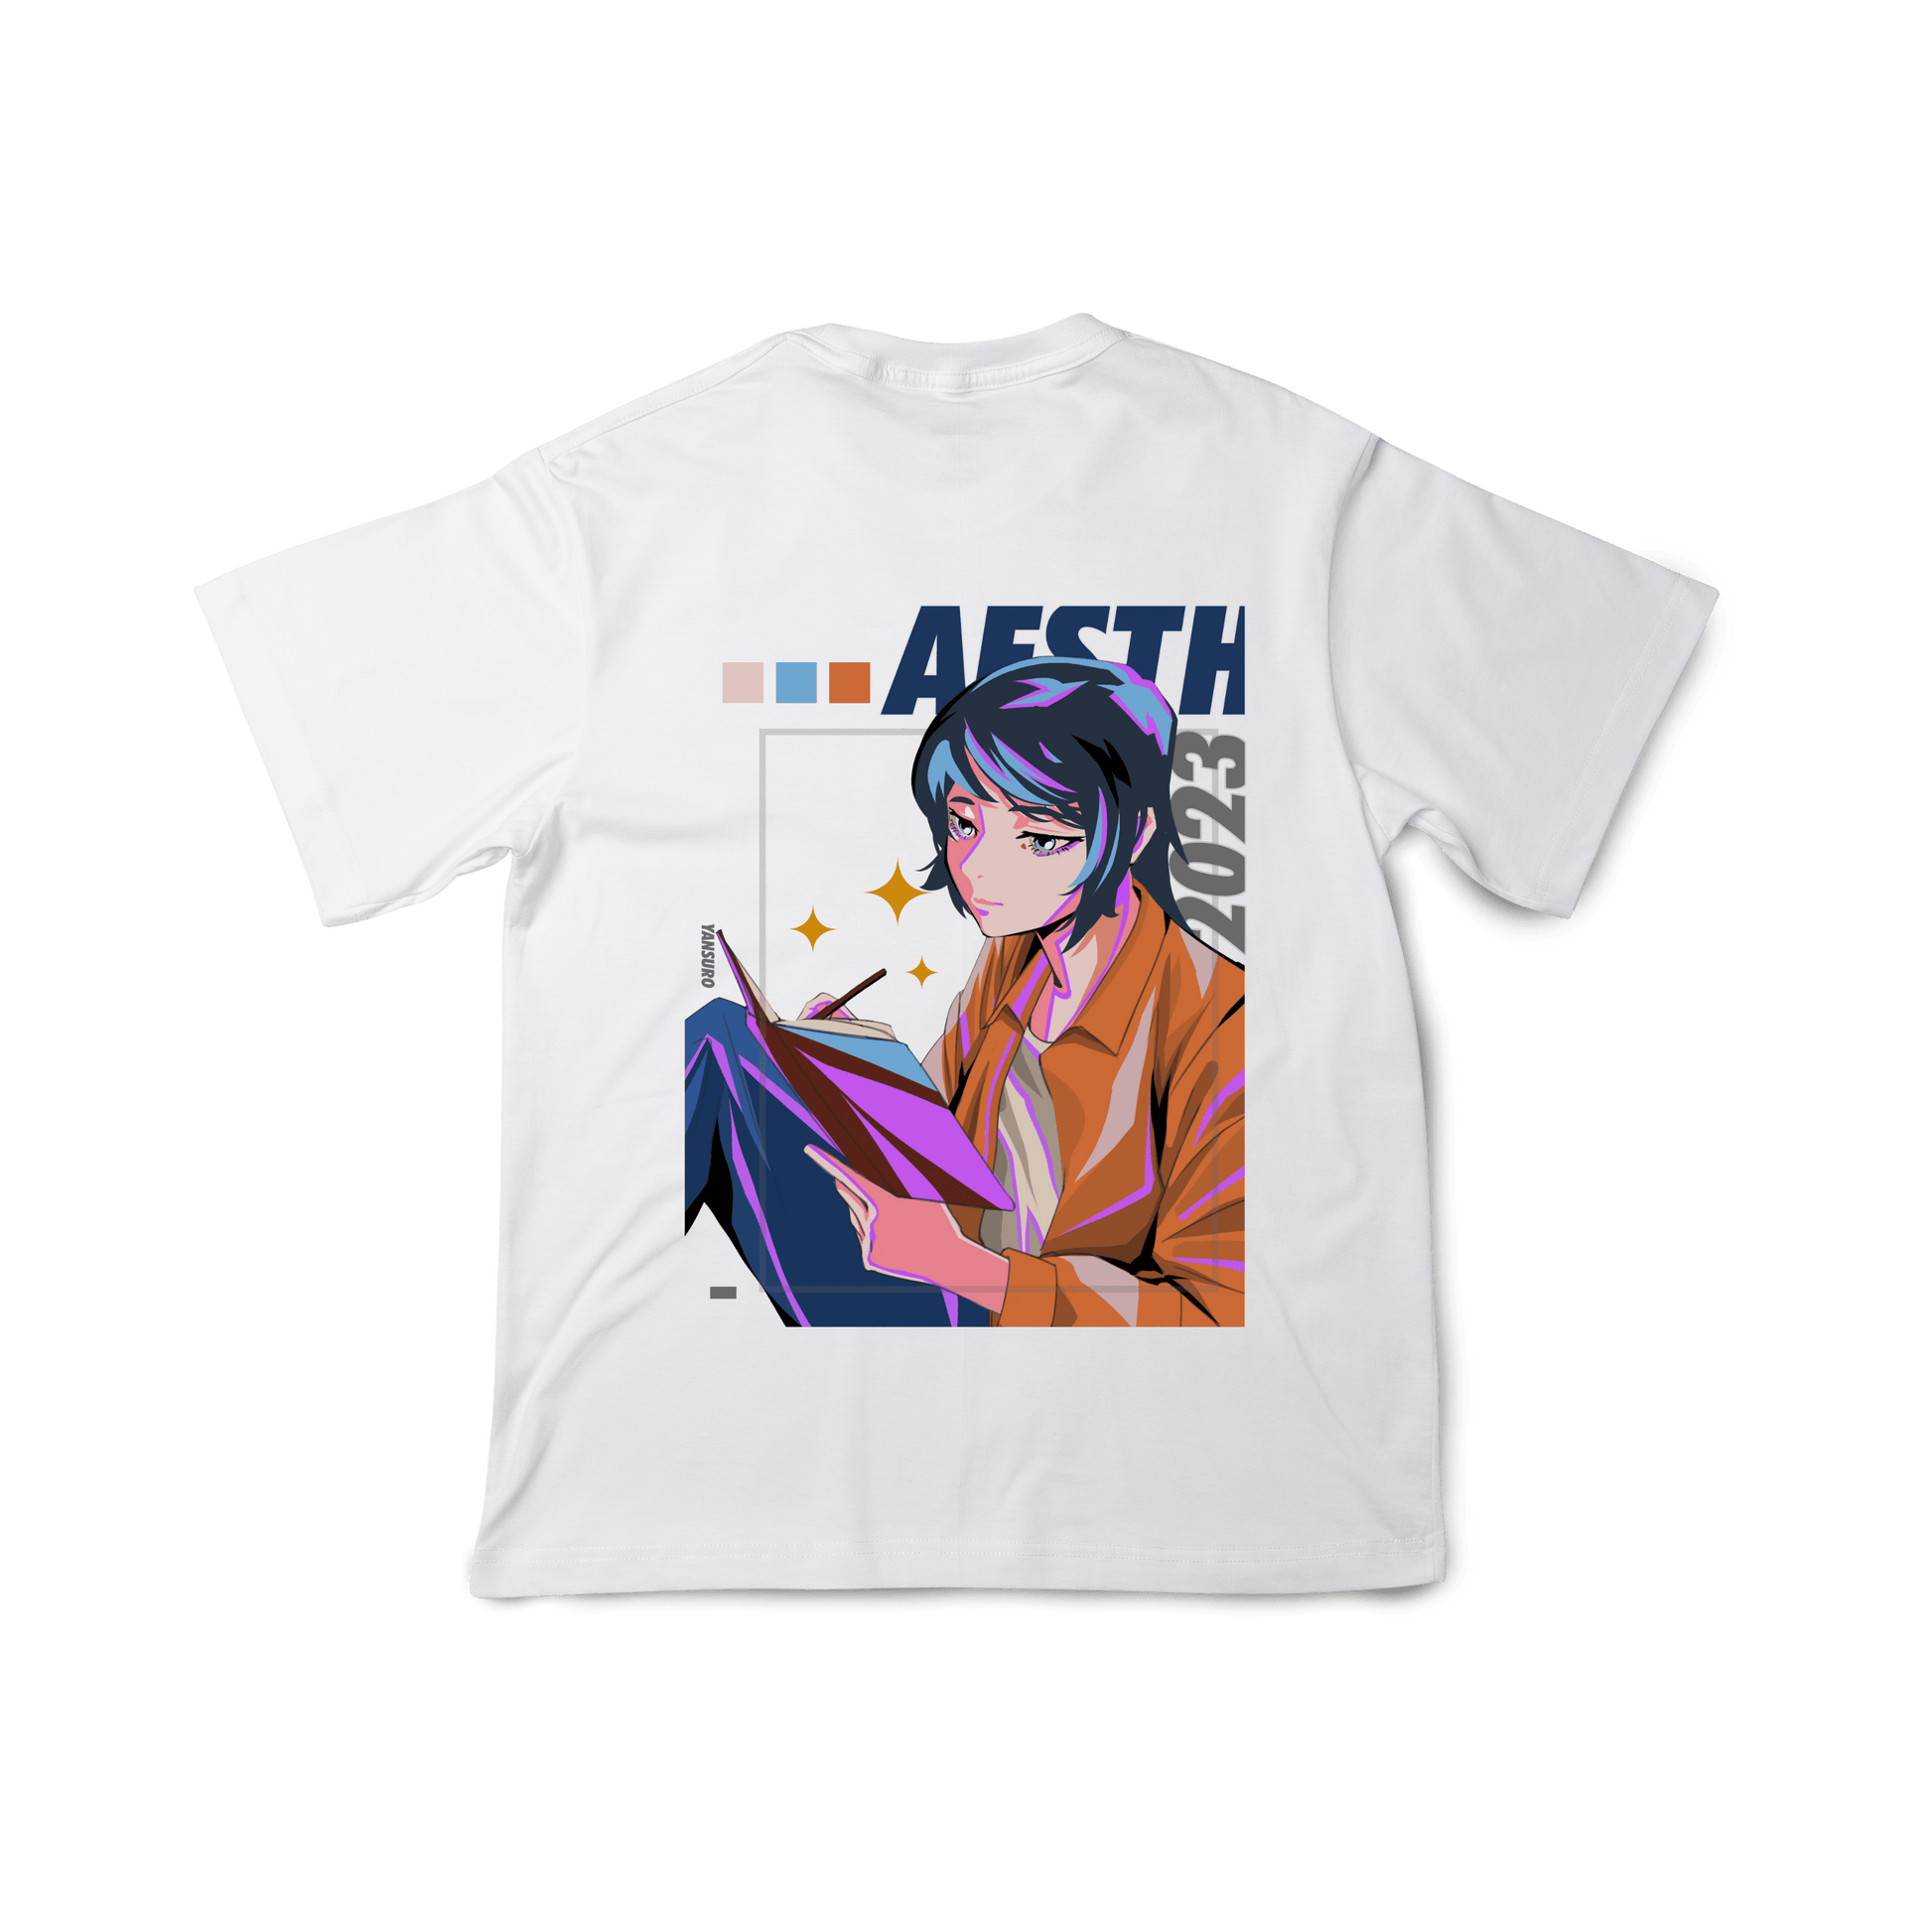 Passion Artist Tee - aesthclothing